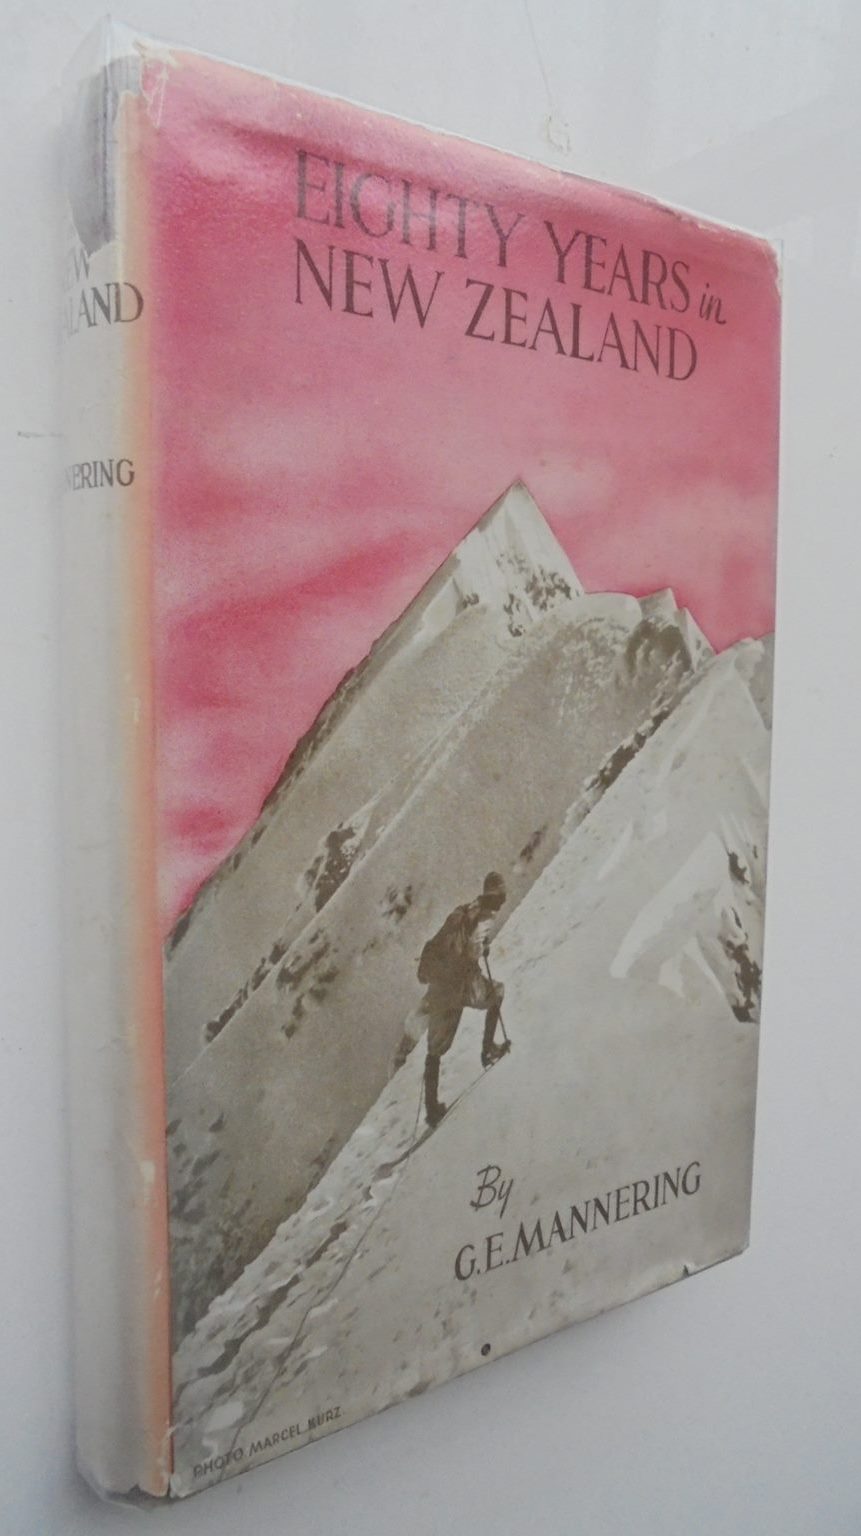 Eighty Years in New Zealand - by G. E. Mannering.